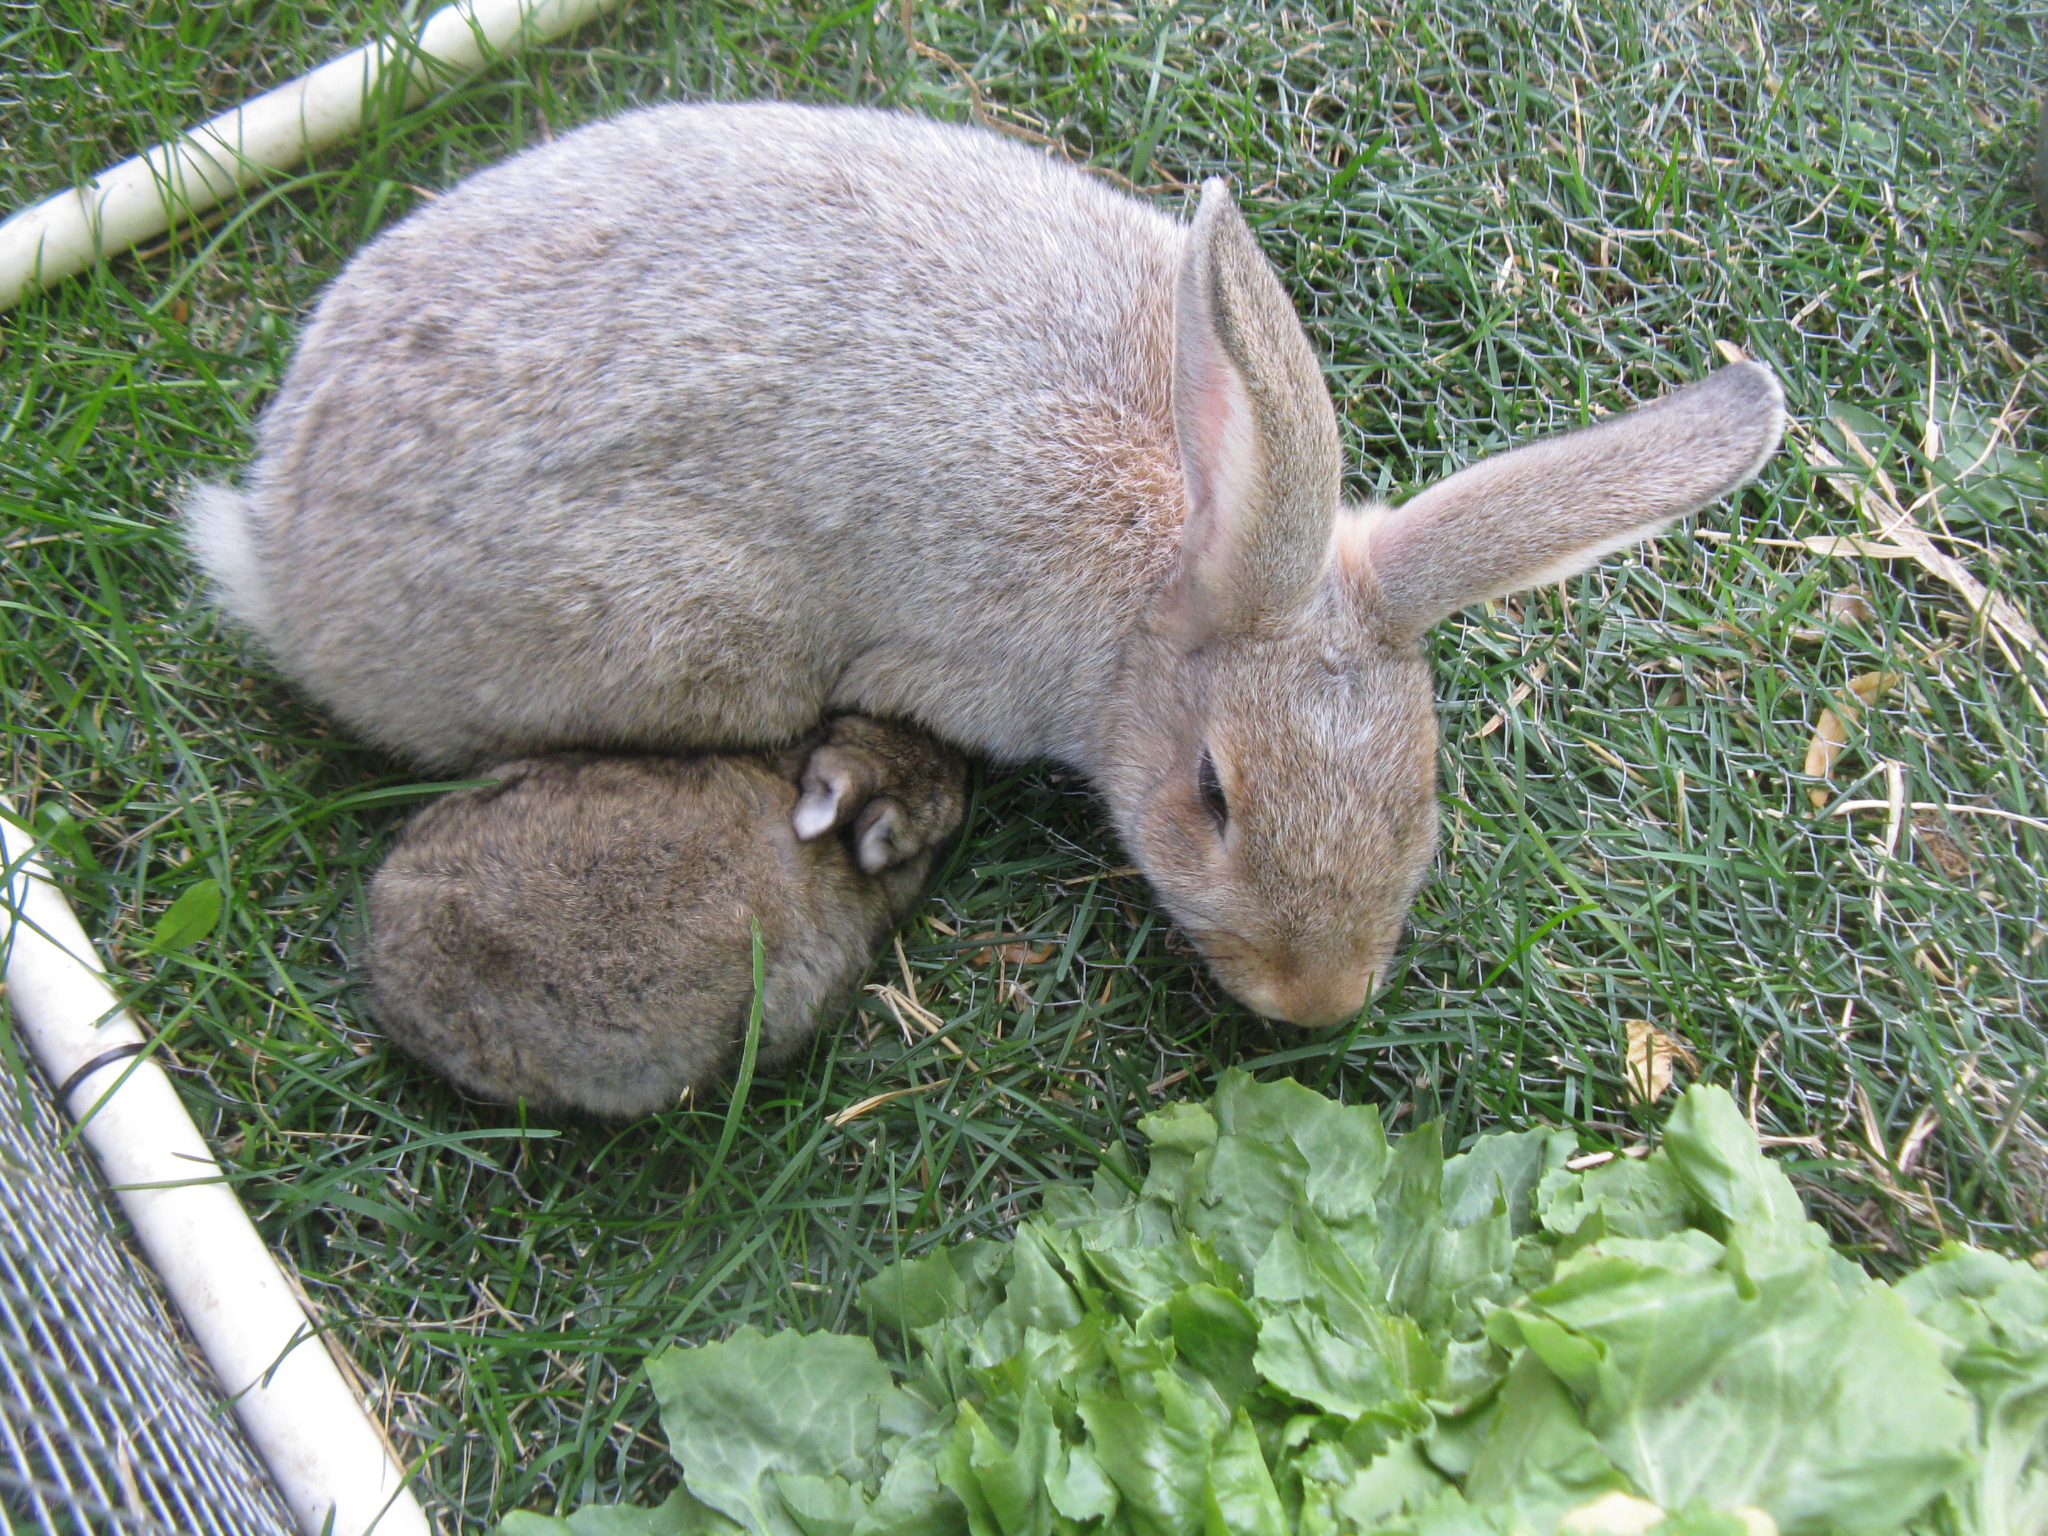 Rabbits from spring 2013 herd. Some were overwintered to breed for 2014. (Yes, herd is the correct term.) 